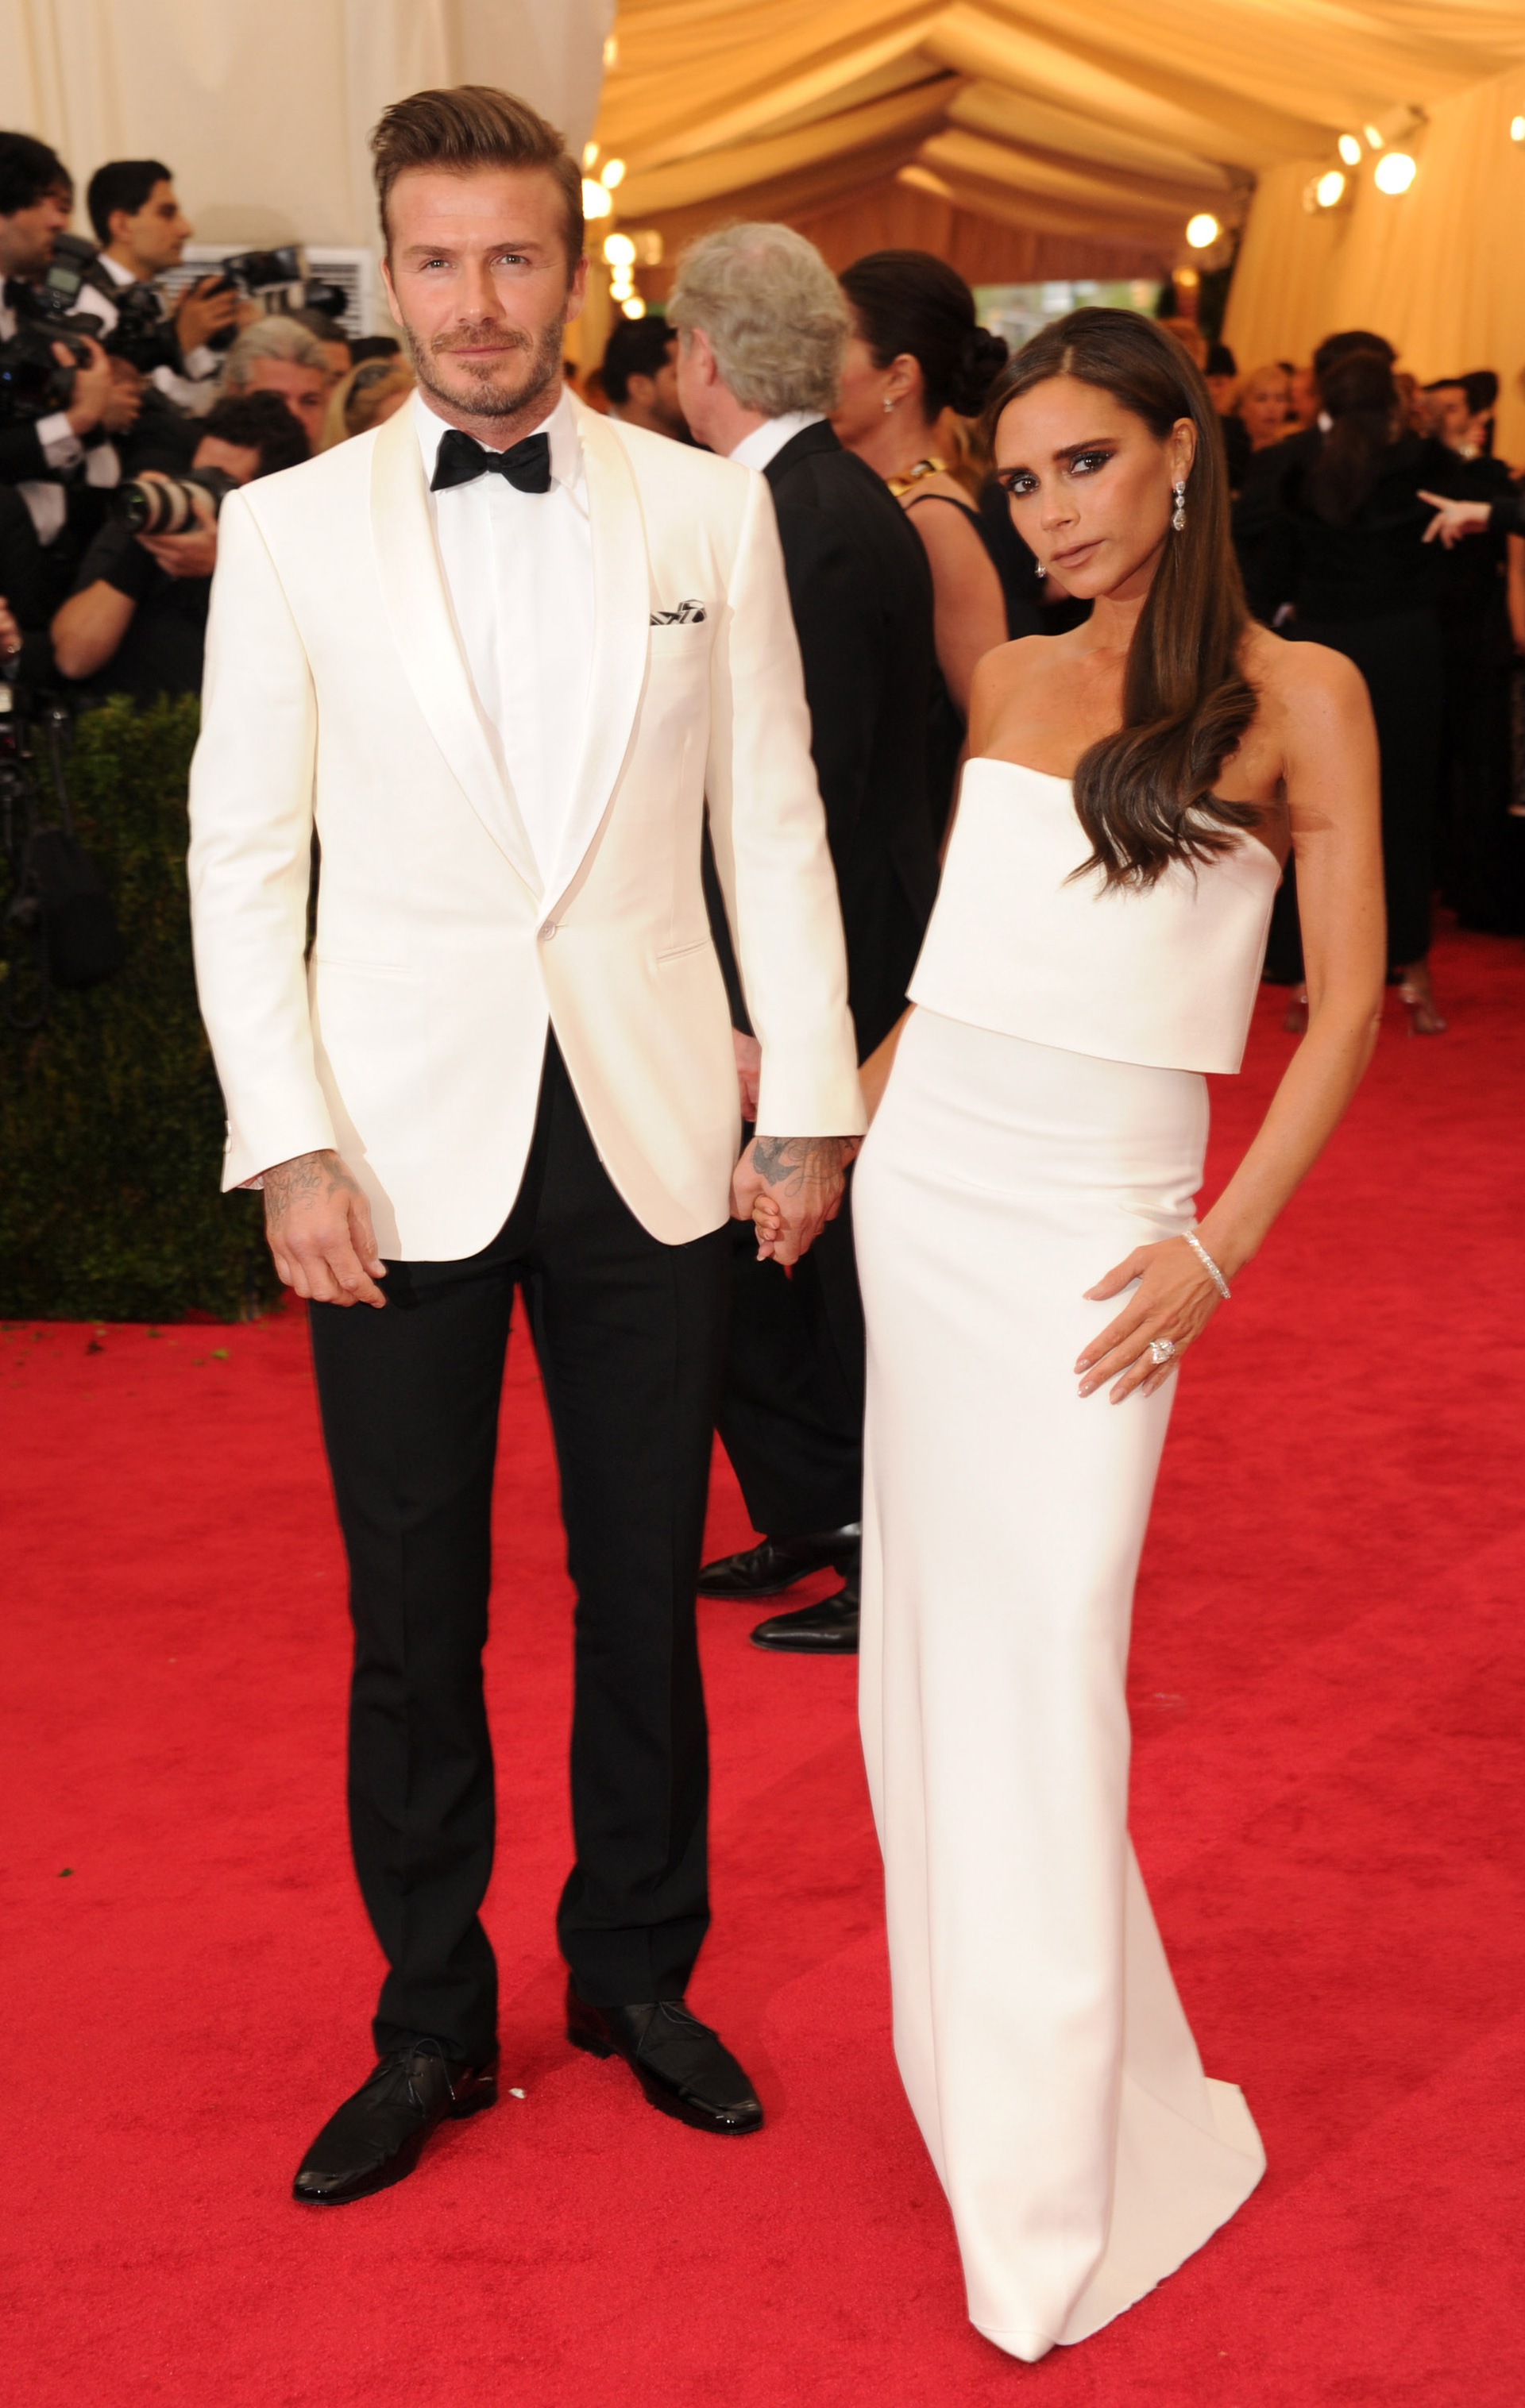 The 30 most jaw-dropping dresses at the 2014 Met Gala - Page 3